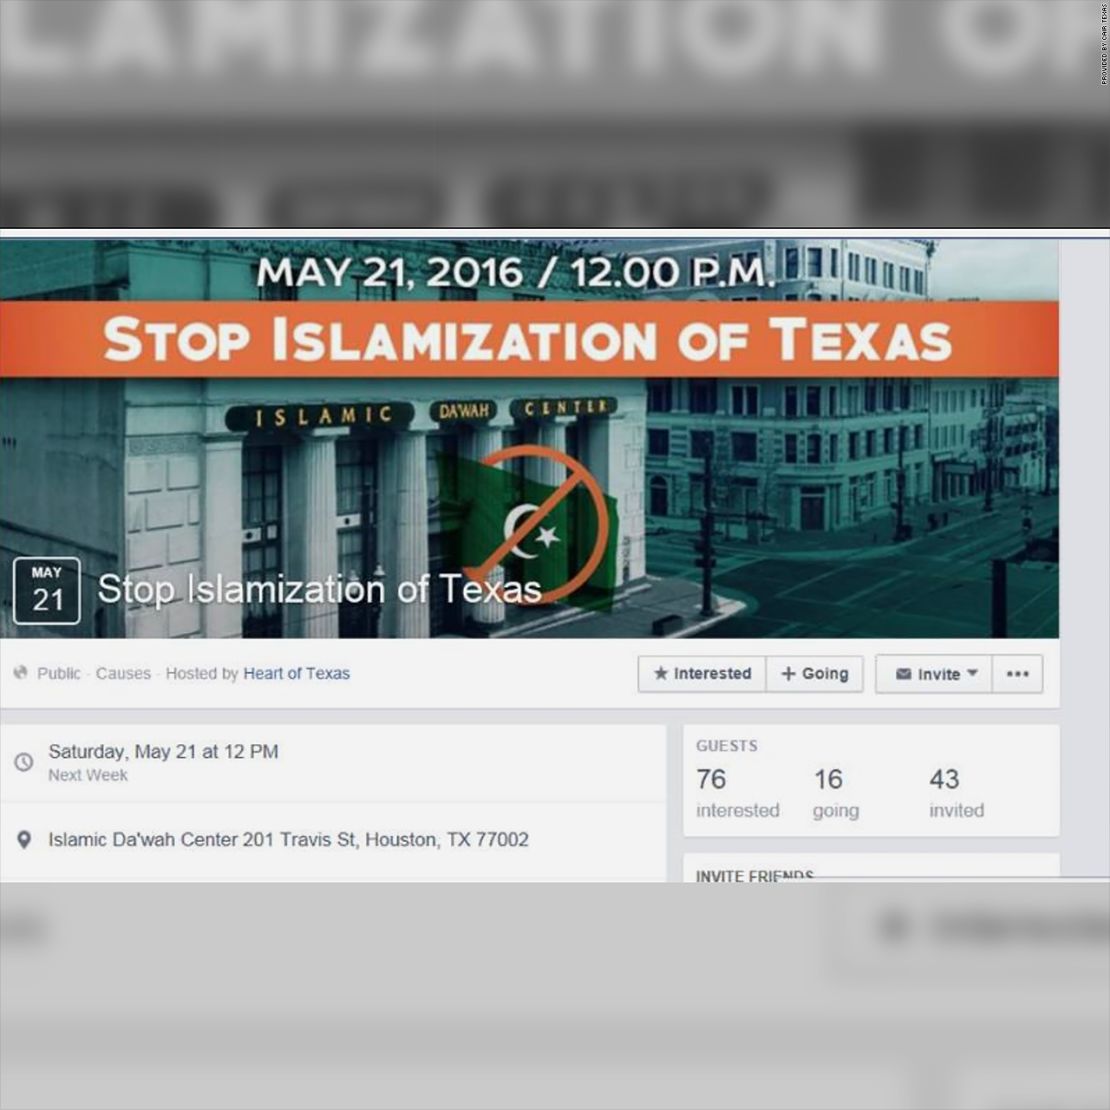 A screenshot of the Event Page for "Stop Islamization of Texas," which was created by the Russian-linked group Heart of Texas.